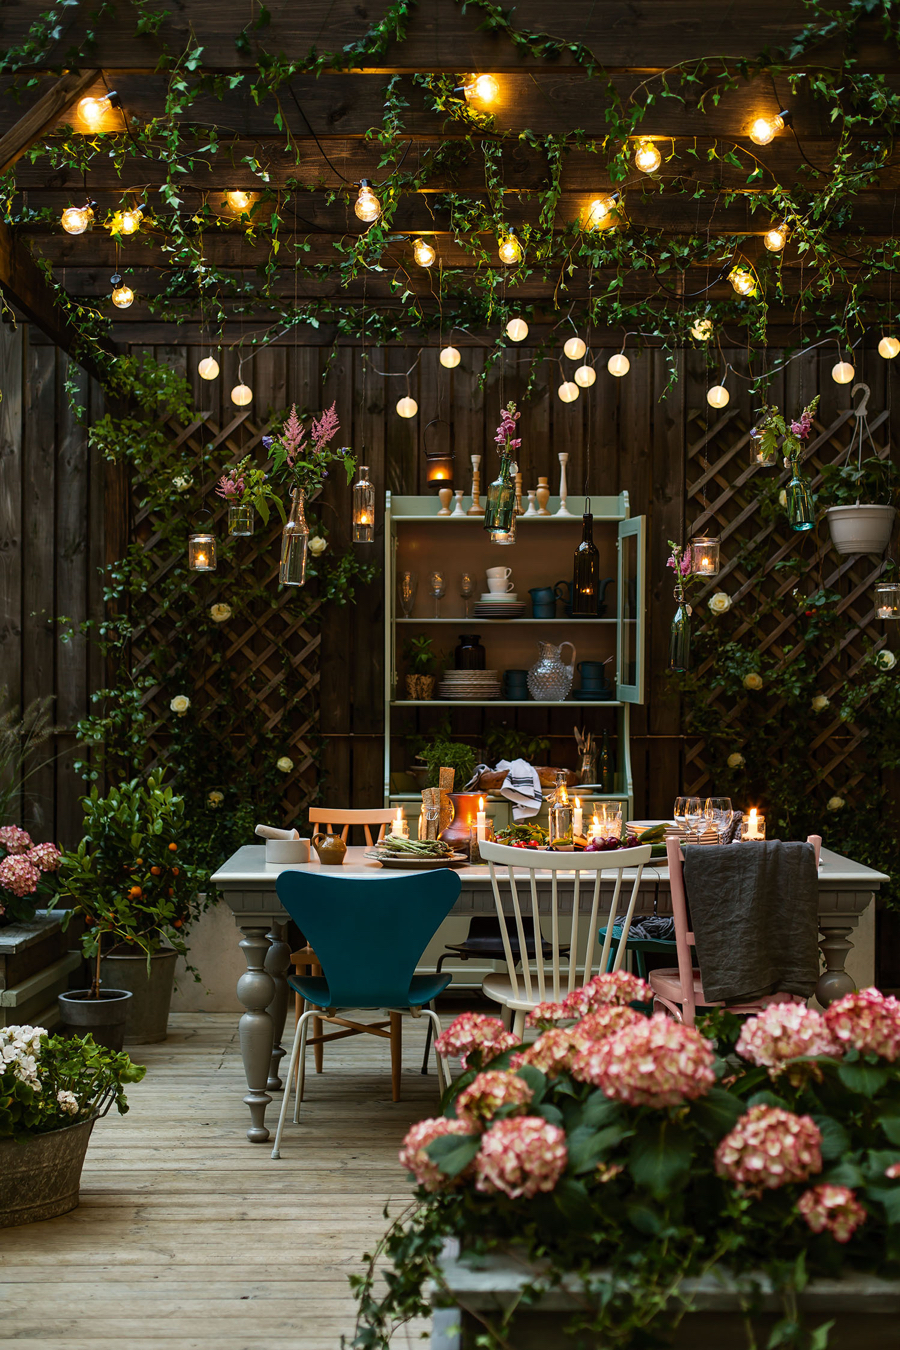 Whimsical Garden with String Lights